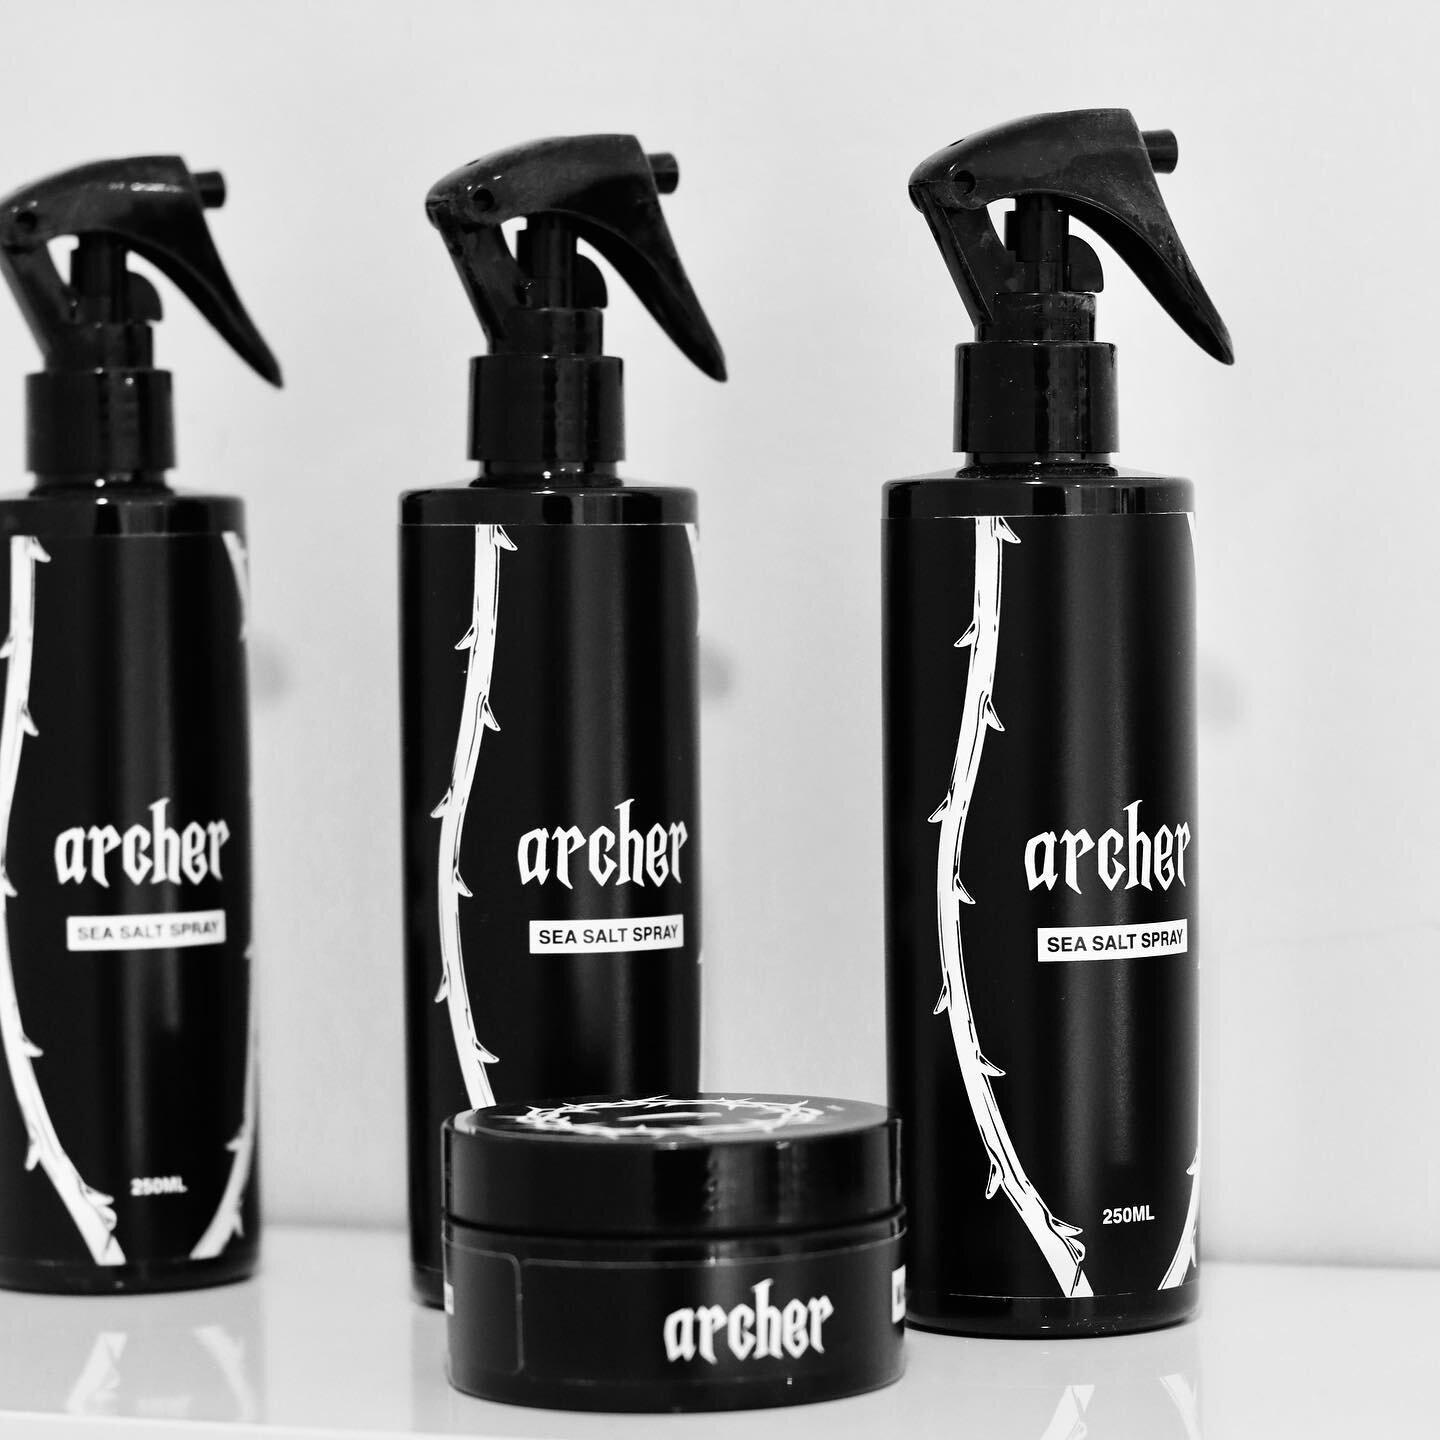 our archer products are a staple in what we do at Bayside Barbers. Our Sea Salt Spray has incredible results with natural feel and hold that&rsquo;s great for textures styles or thinning hair. Our Matte Clay has a great hold and pliable to work into 